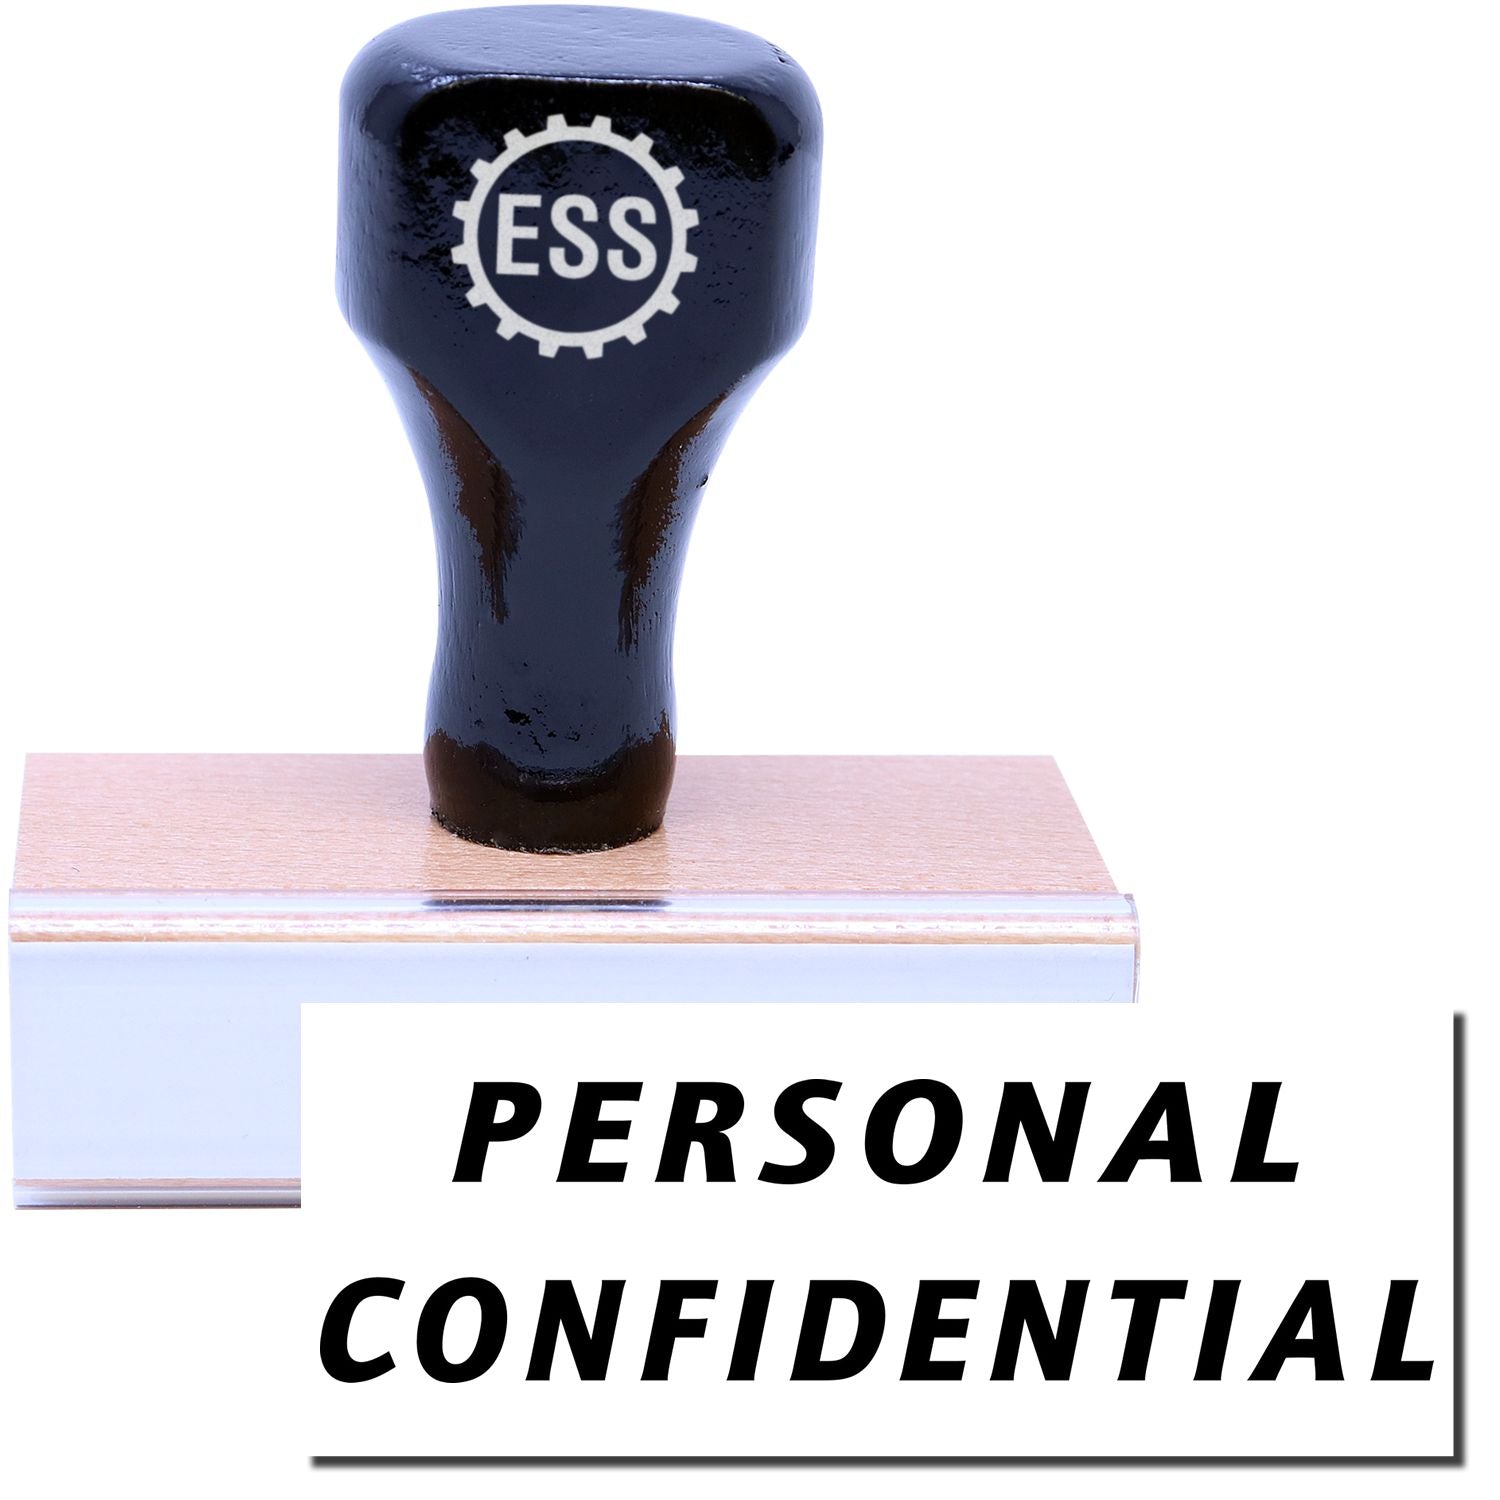 A stock office rubber stamp with a stamped image showing how the text "PERSONAL CONFIDENTIAL" in a large italic font is displayed after stamping.